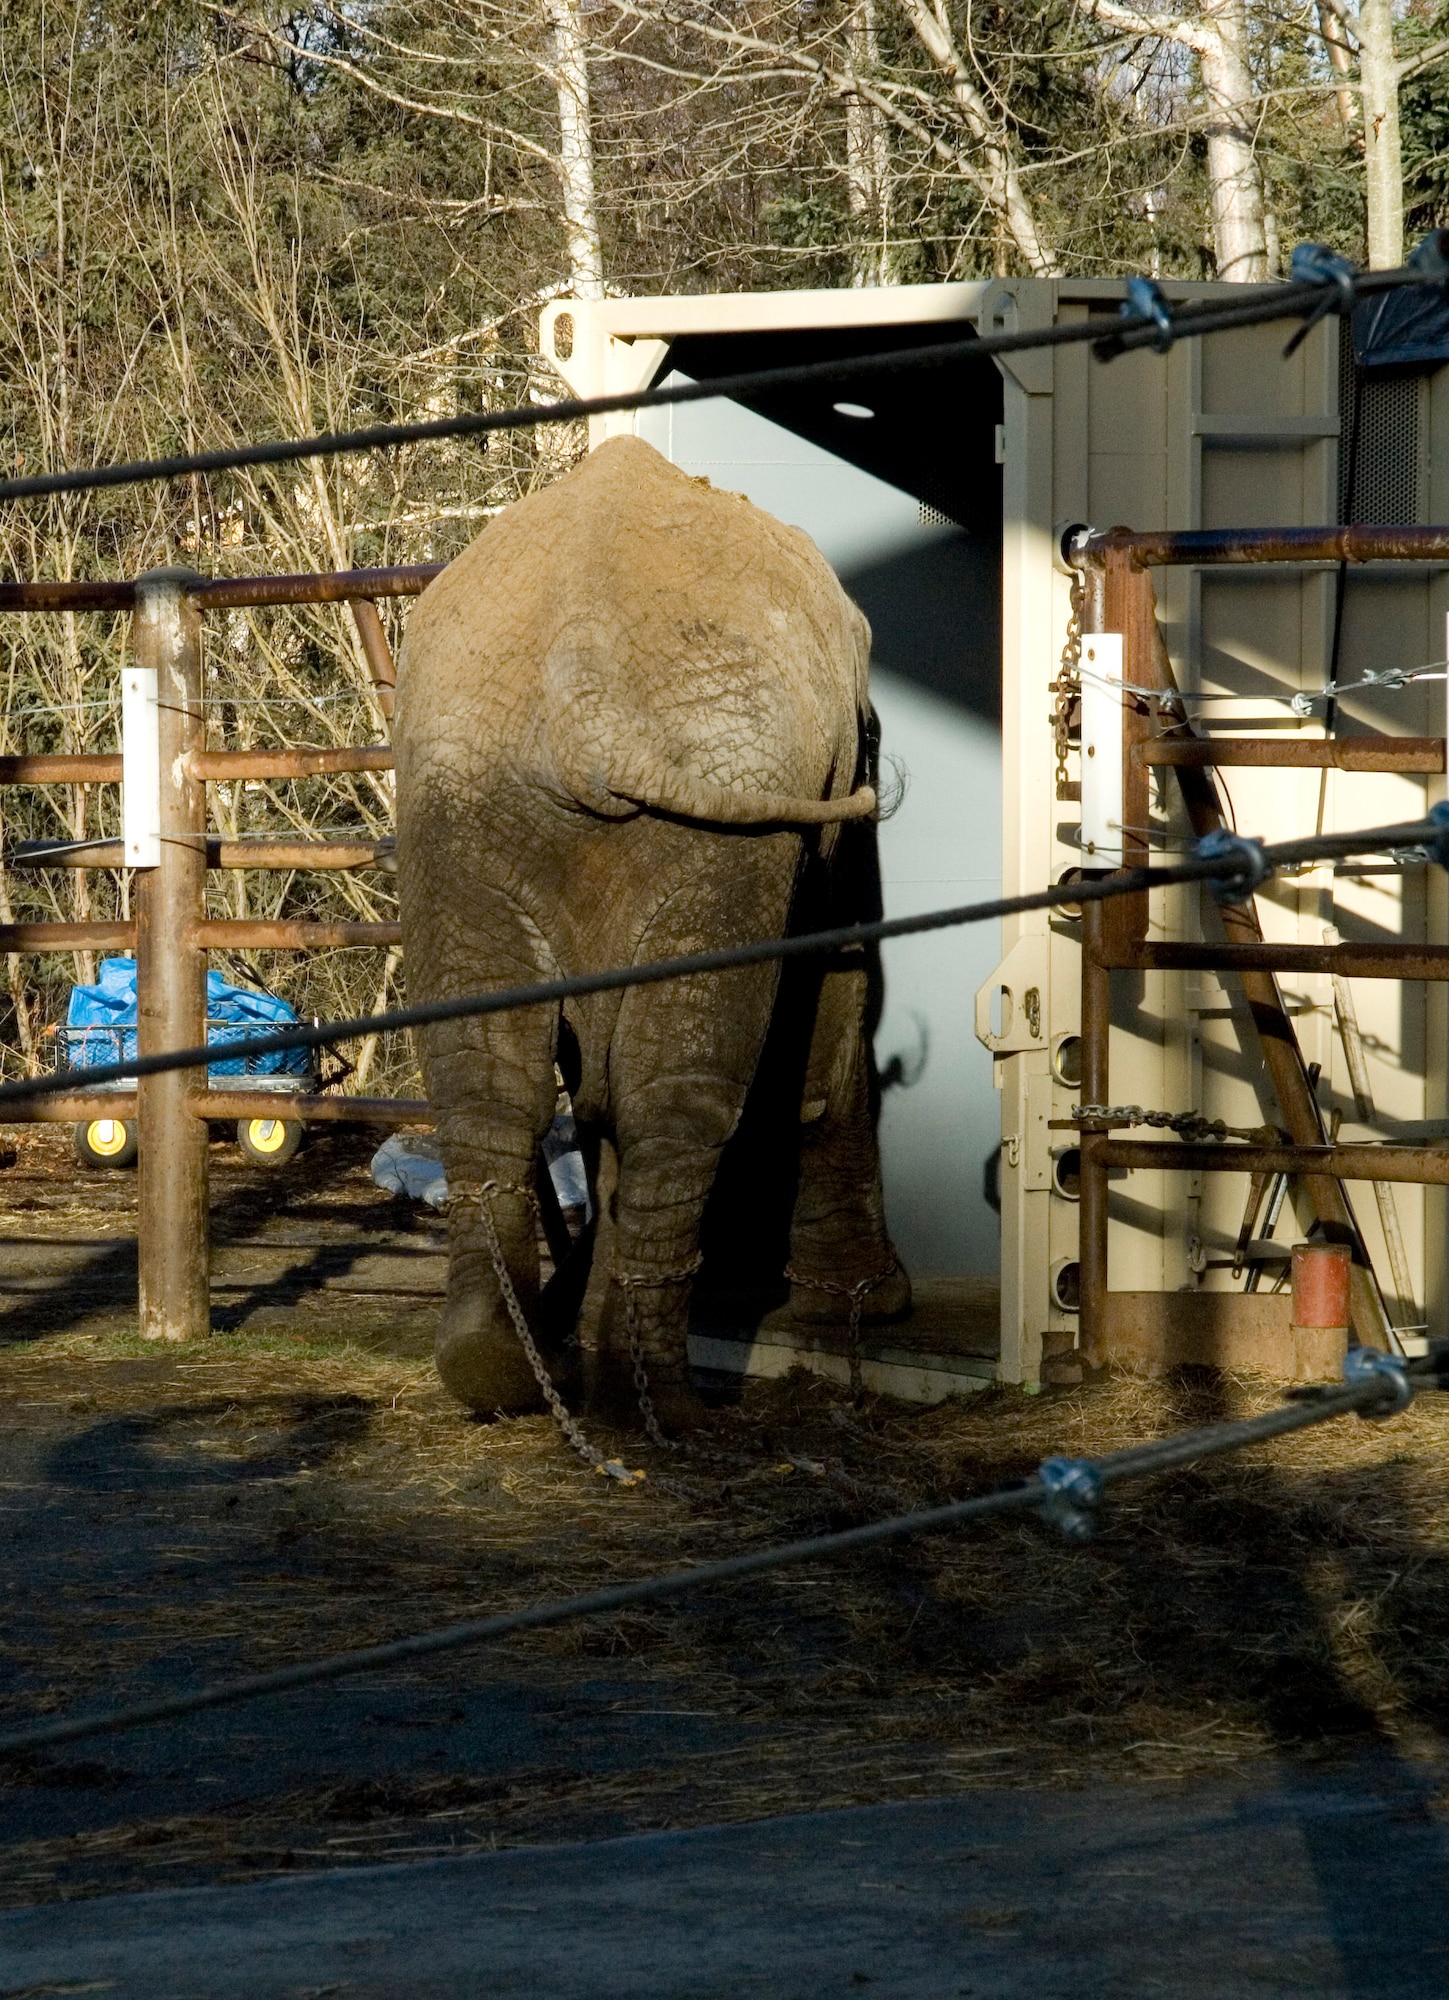 Maggie, an African elephant at the Alaska Zoo in Anchorage, Alaska, enters the crate that was used to transport her to the Performing Animals Welfare Society ARK 2000 Wildlife Sanctuary in California. An Air Force C-17 Globemaster III from Elmendorf Air Force Base, Alaska, was used to fly Maggie to her new home. Maggie was flown from Elmendorf AFB to Travis AFB, Calif., before being transported to PAWS. (U.S. Air Force photo by Airman 1st Class Jonathan Steffen)